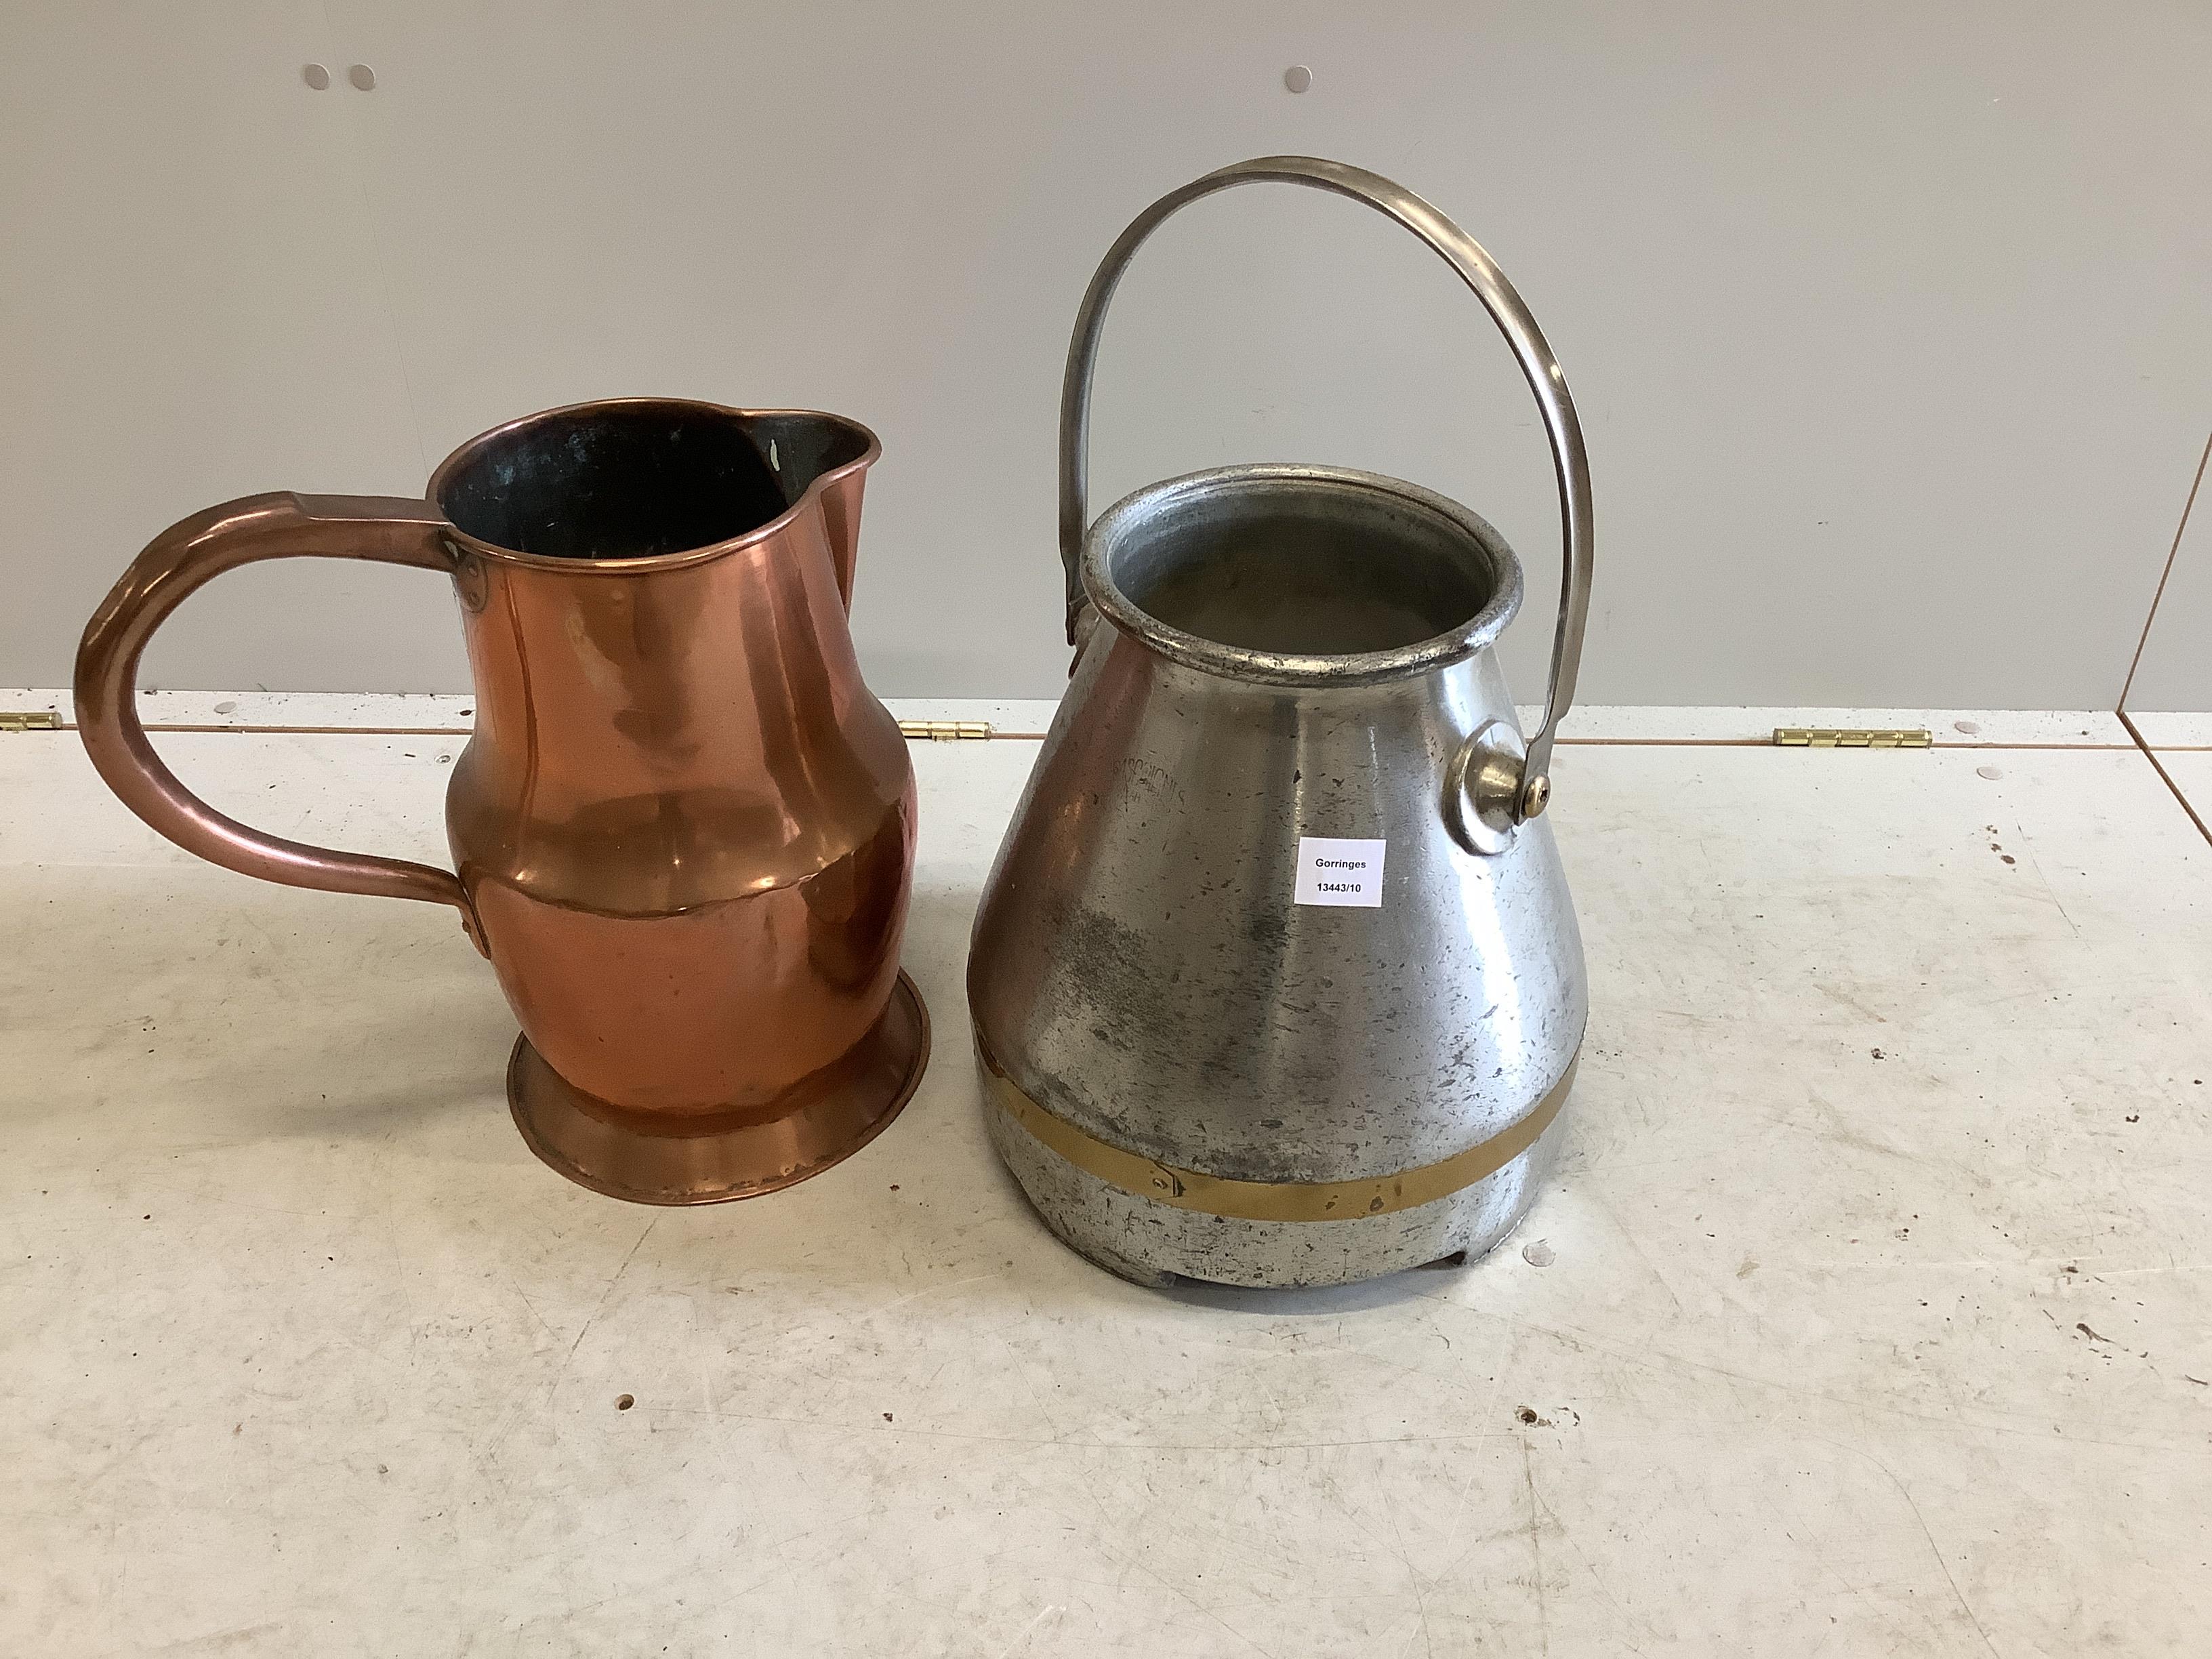 A large Victorian copper jug and an aluminium dairy bucket, larger height 40cm